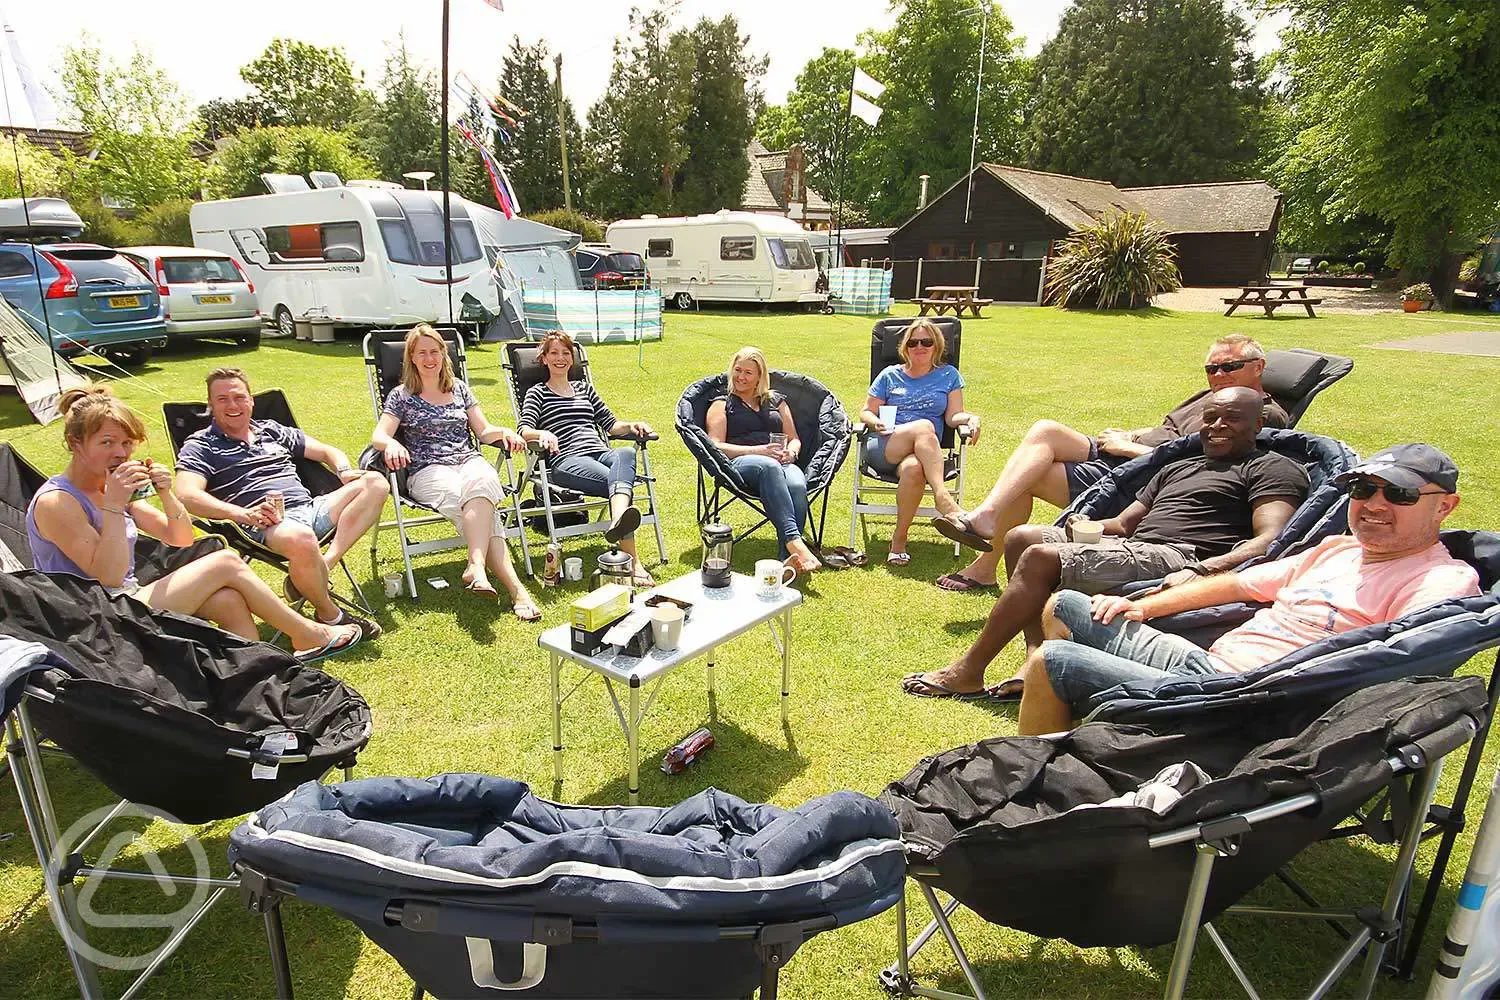 We welcome group camping and rally bookings